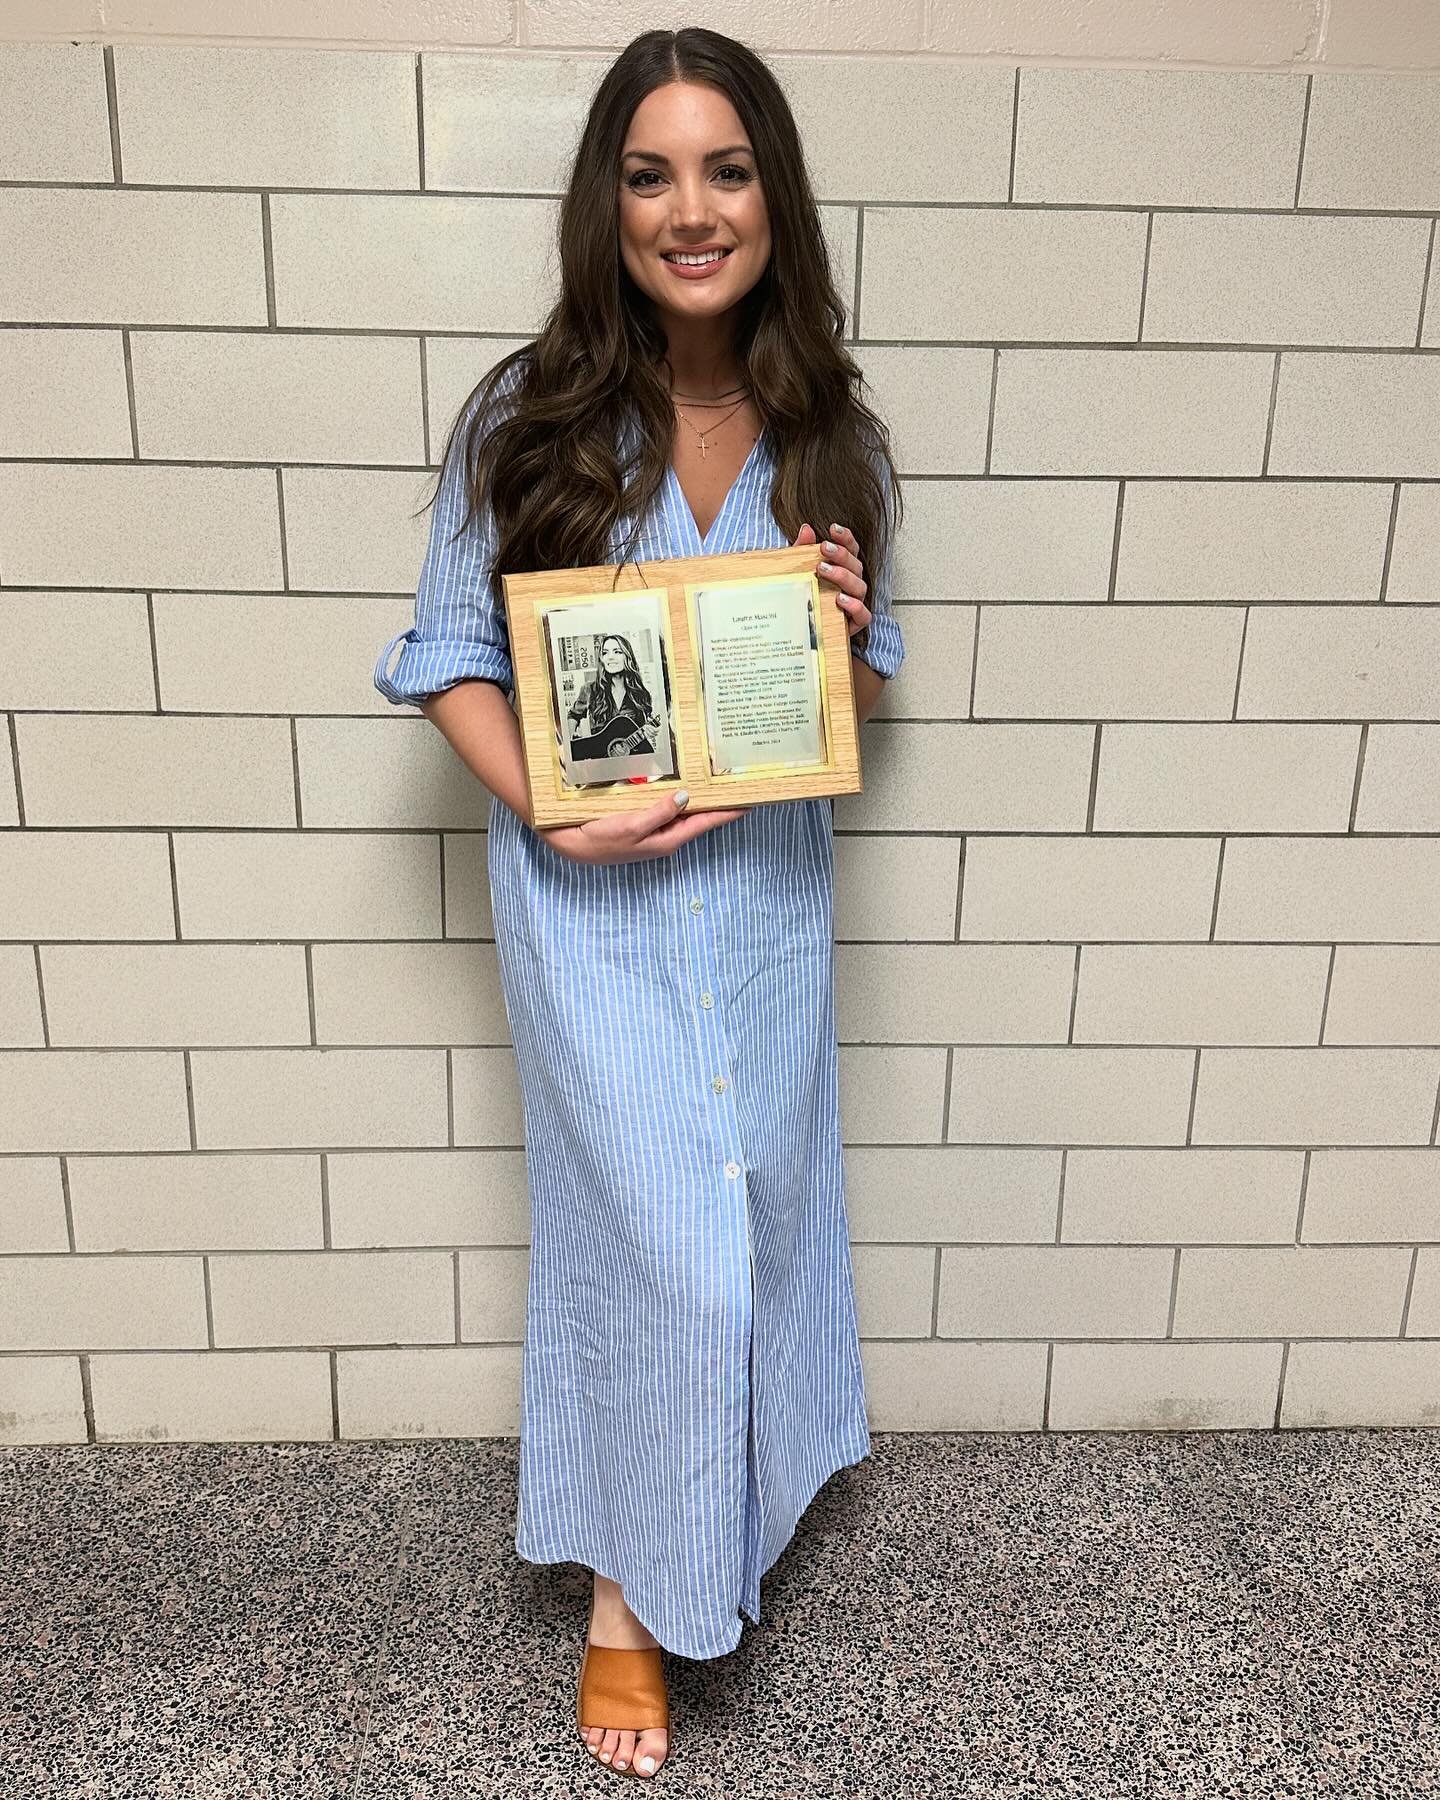 Last night, May 7th (3 years TO THE DAY of my Grand Ole Opry debut), I had the immense blessing and honor of being inducted into the Louisville High School Hall of Achievement alongside my fellow inductee, Joe French. I can&rsquo;t even tell you how 